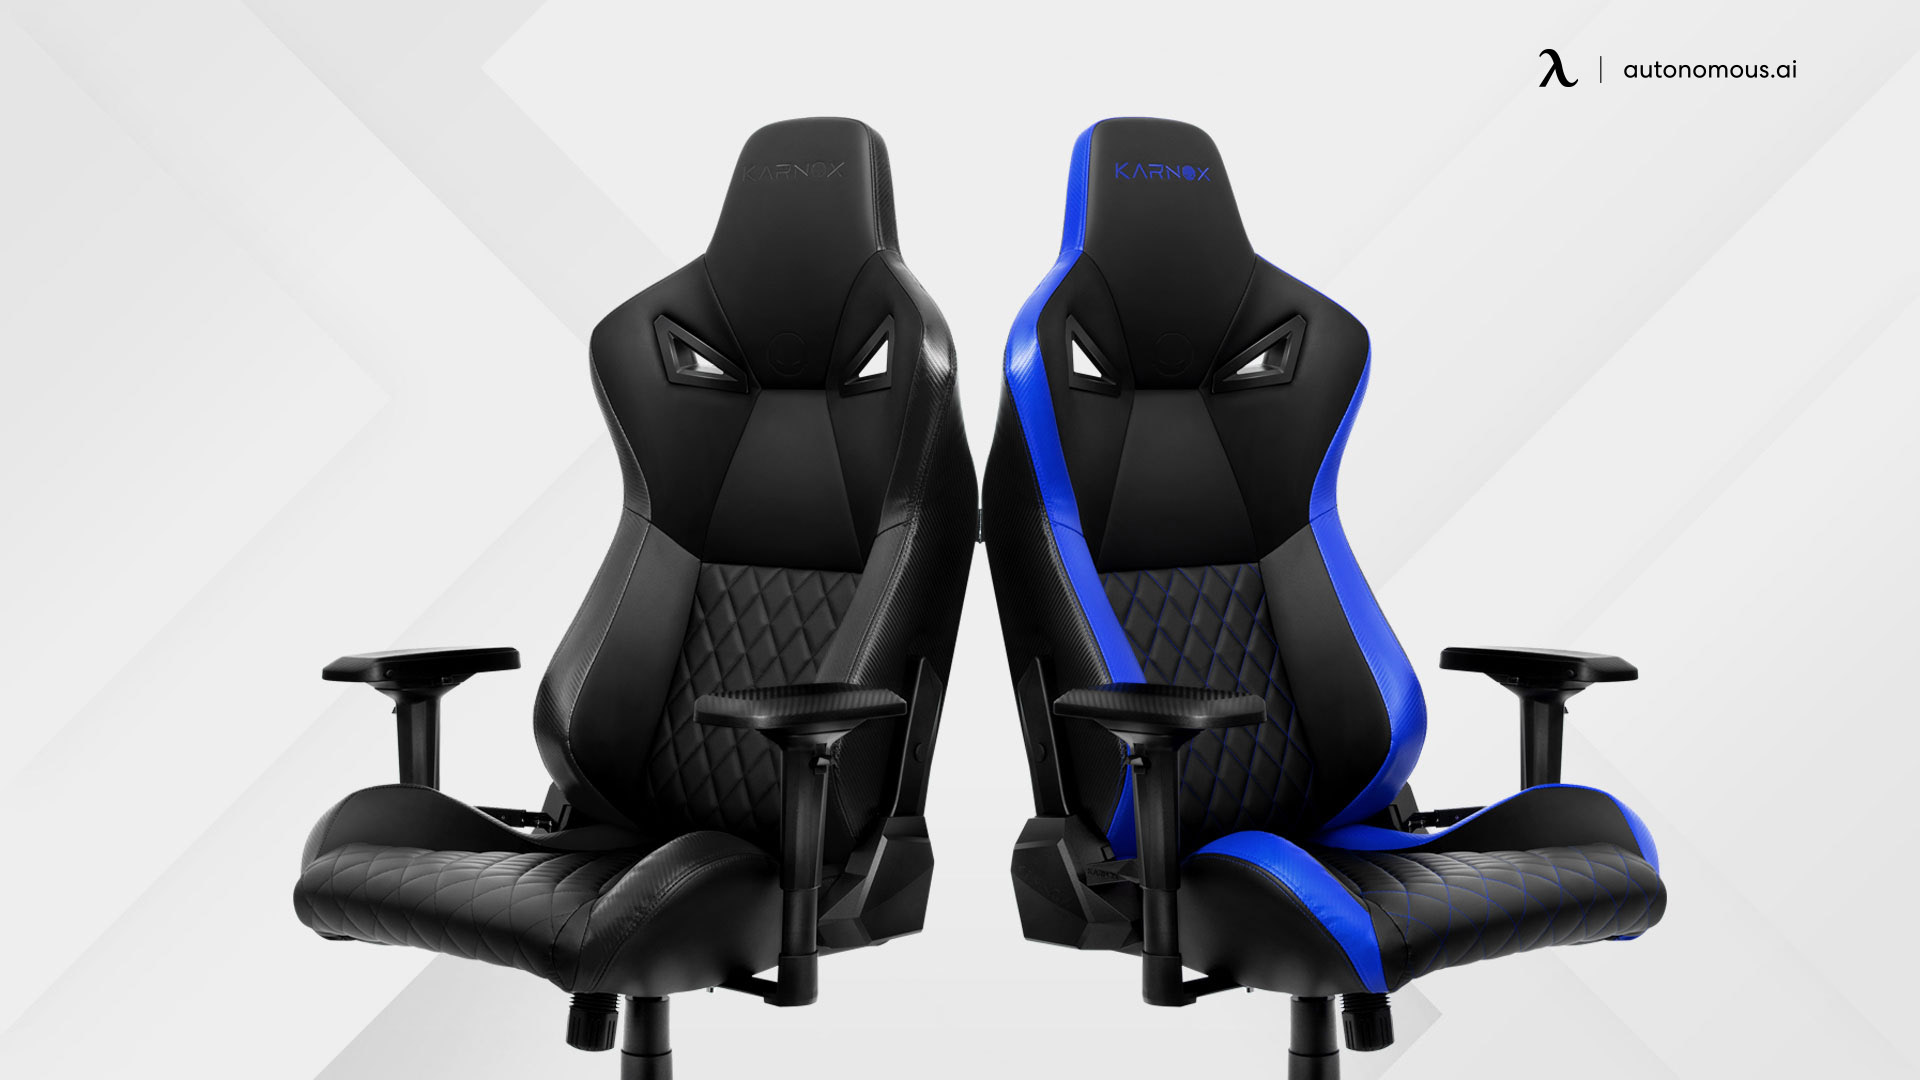 Leather karnox Gaming Chair